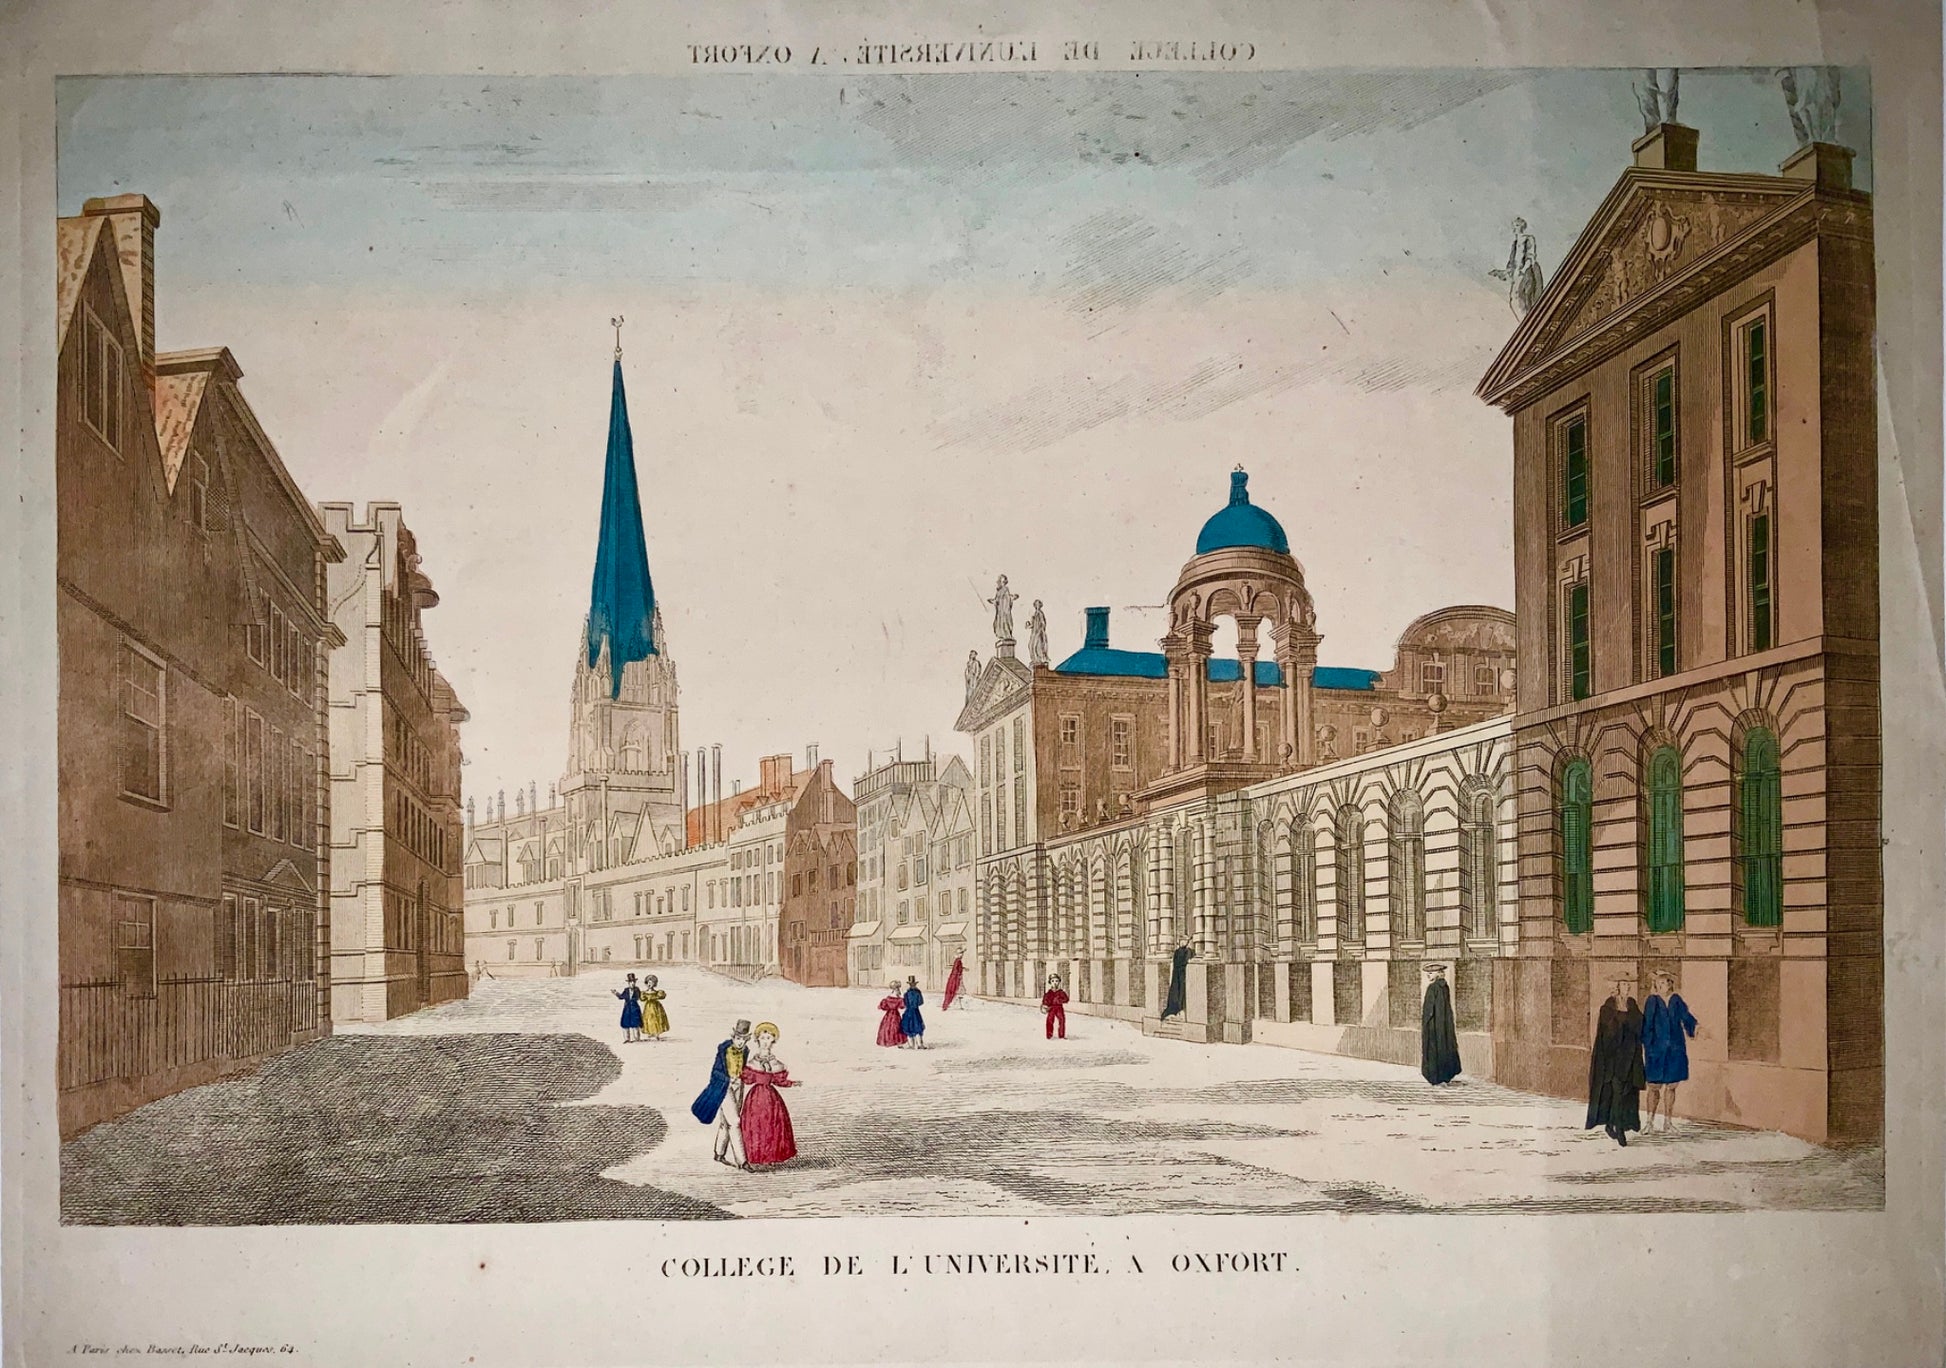 1795 c OXFORD: Vue d’Optique - The High Street - Queen’s College French Edn